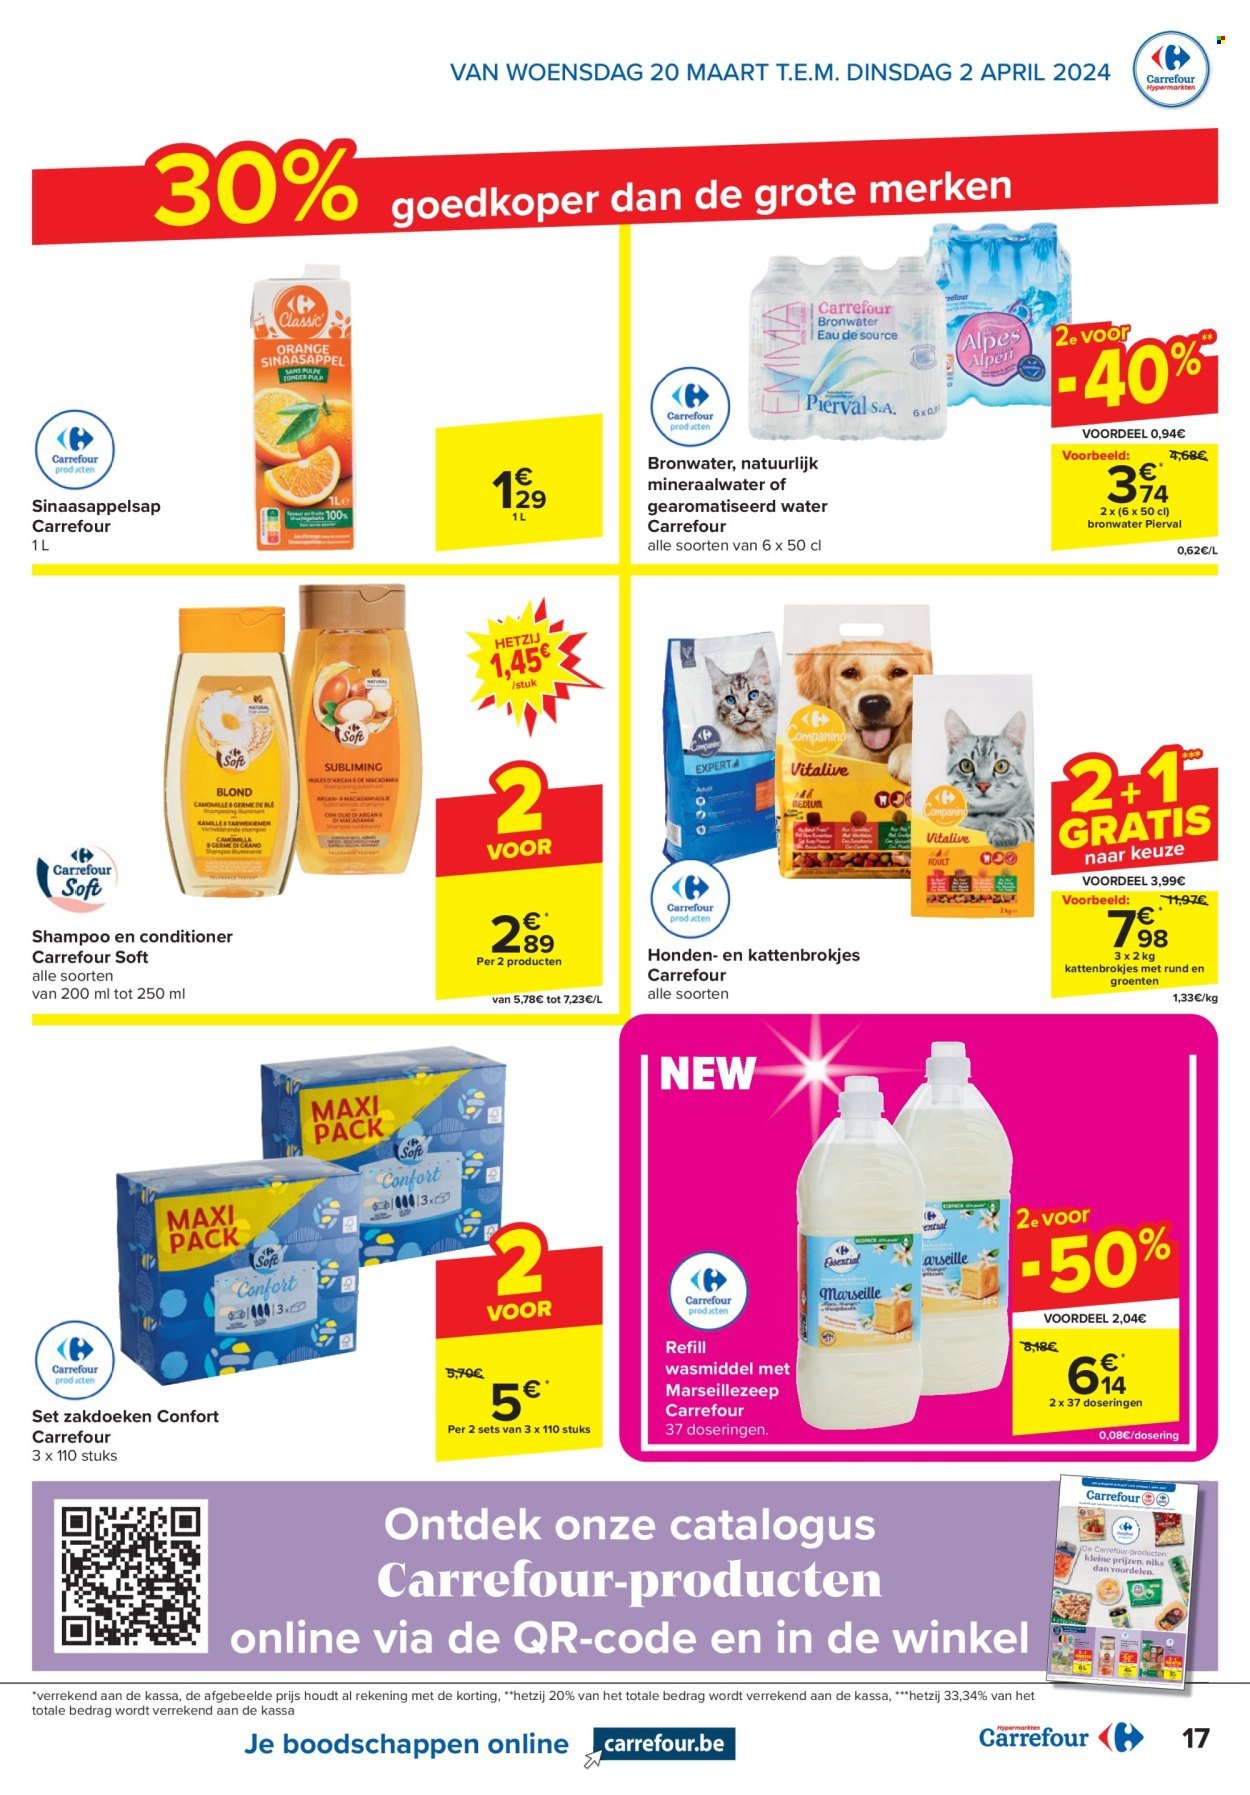 Catalogue Carrefour hypermarkt - 20.3.2024 - 2.4.2024. Page 17.